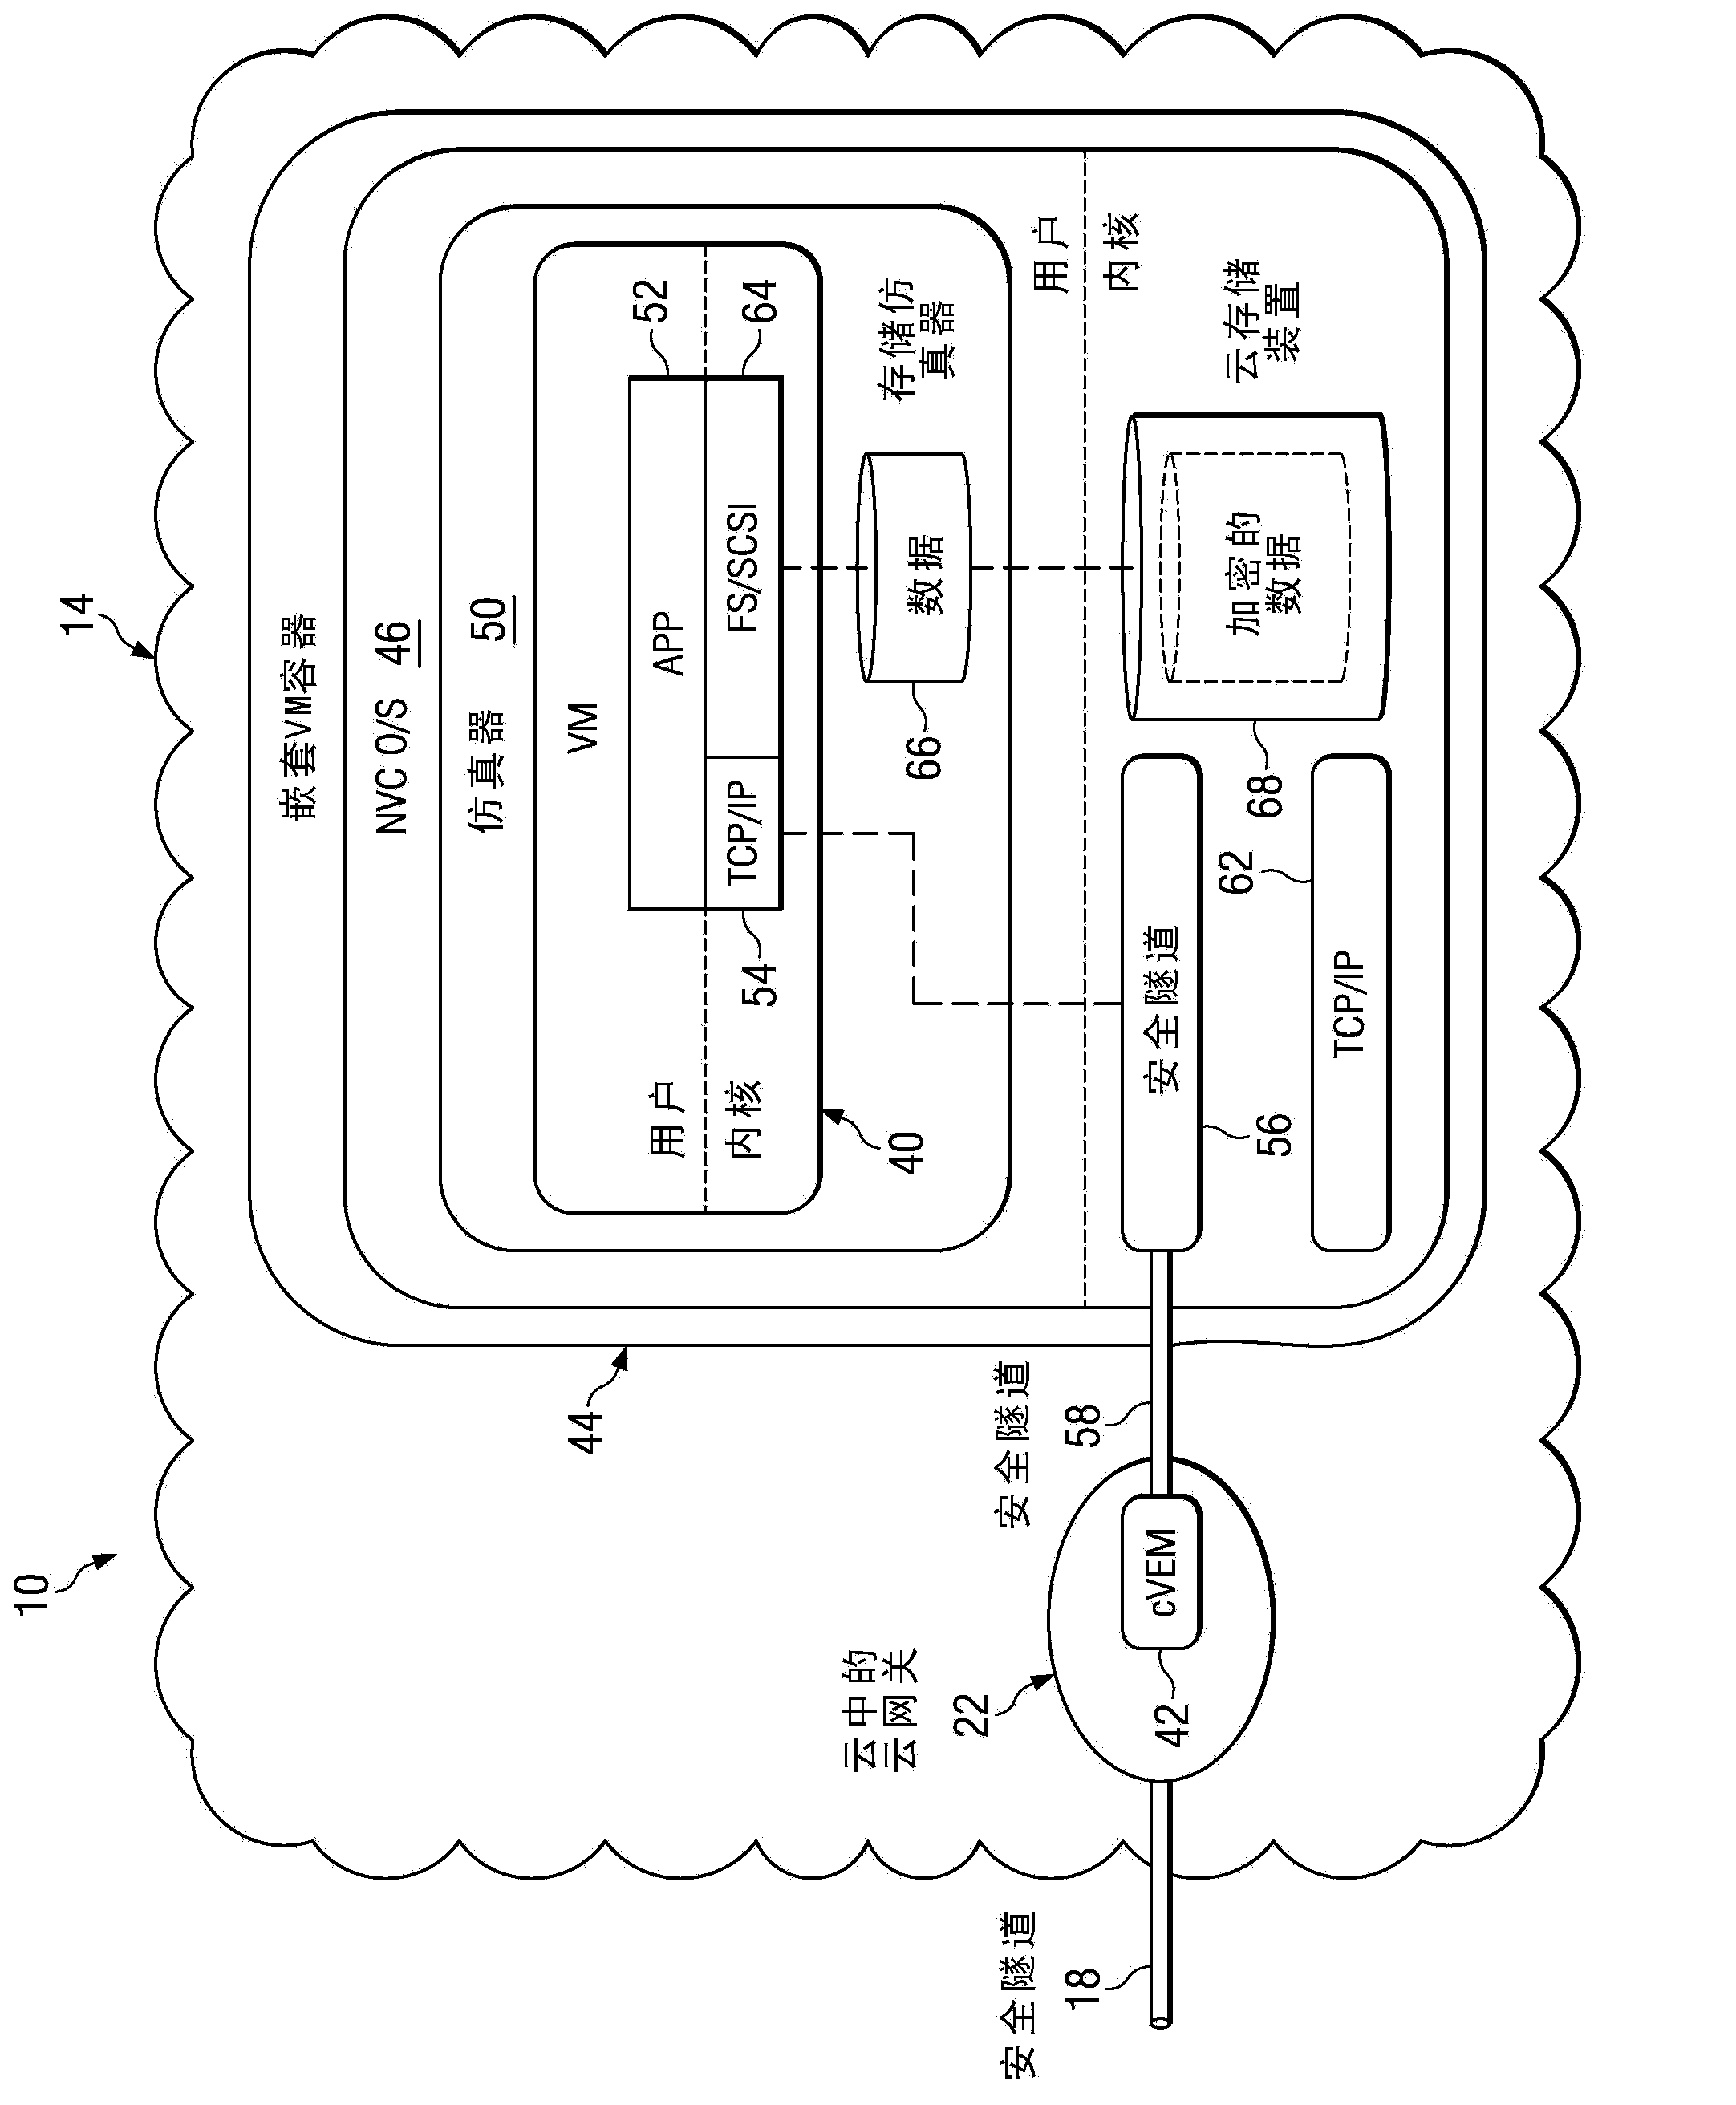 System and method for migrating application virtual machines in a network environment